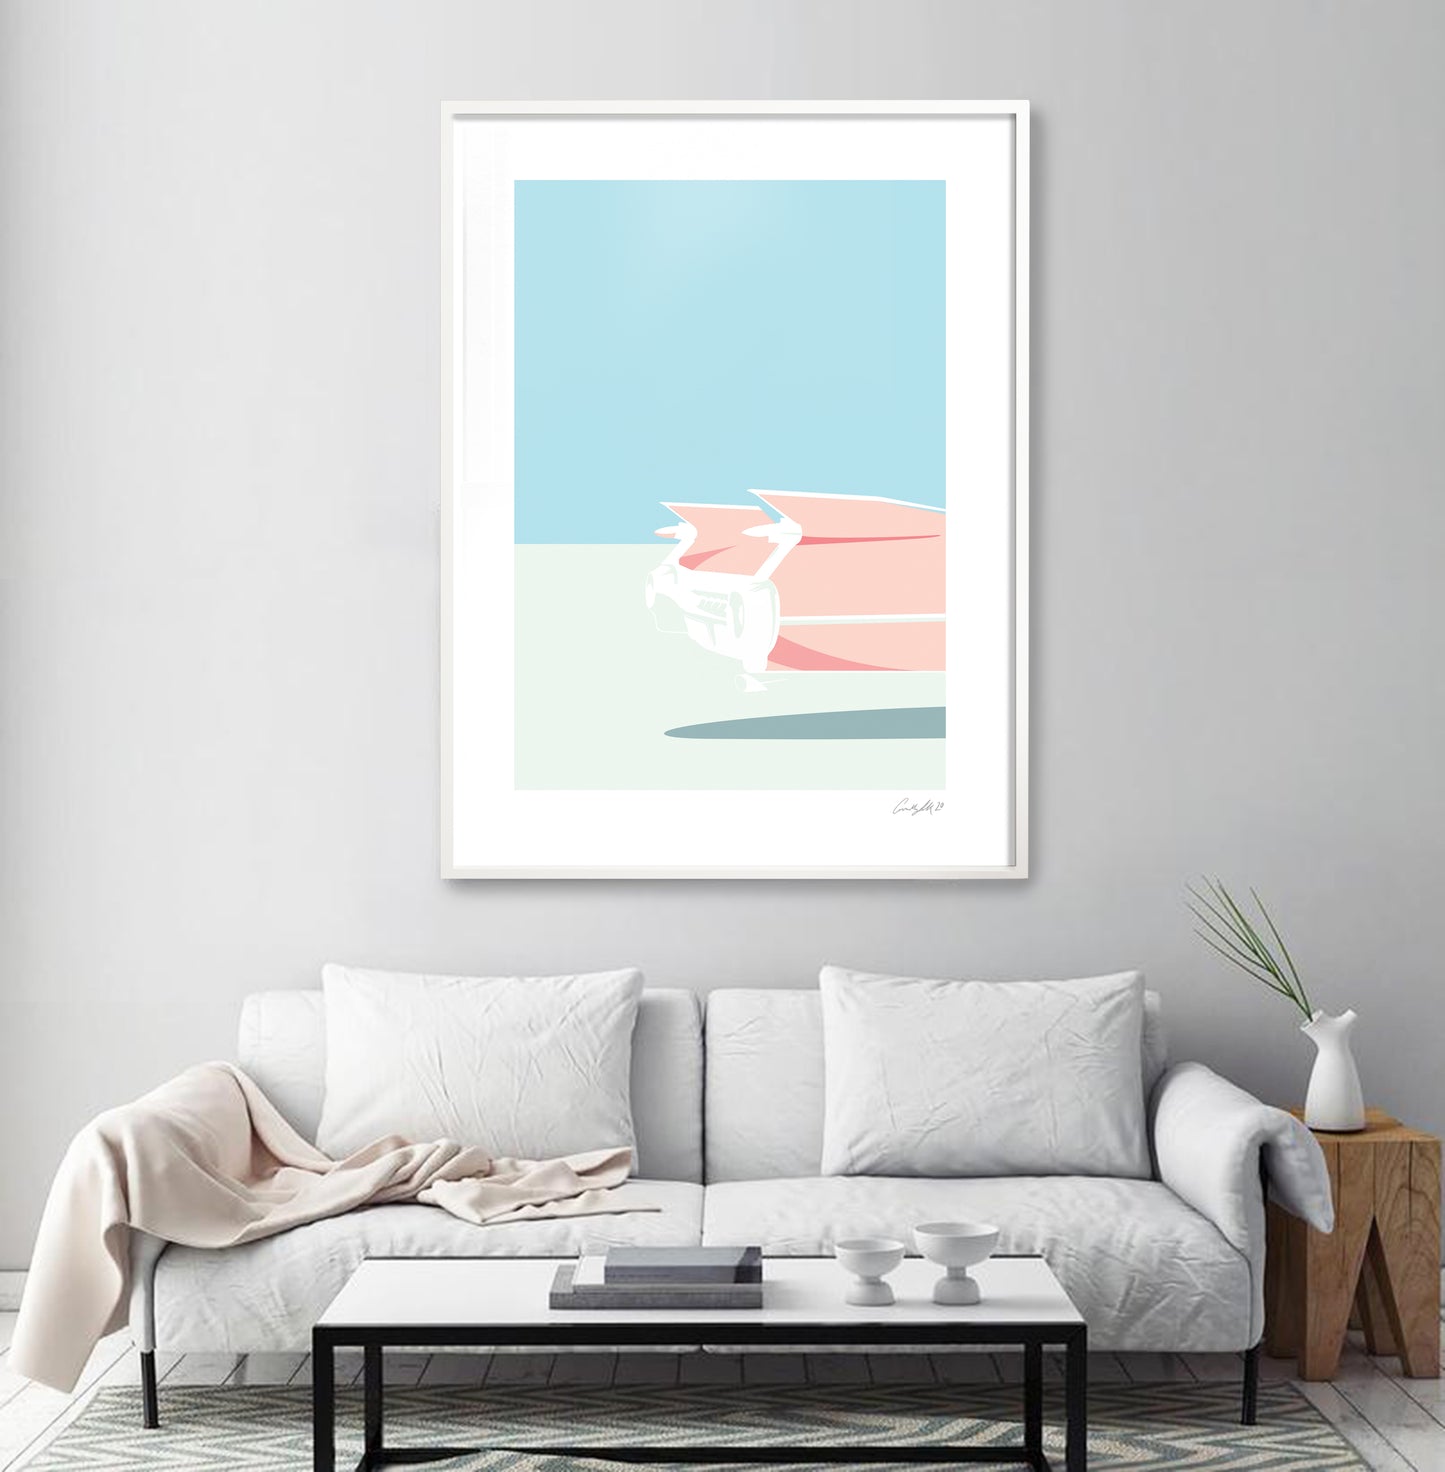 Limited Edition (Giclée print) - Cadillac (Pink)